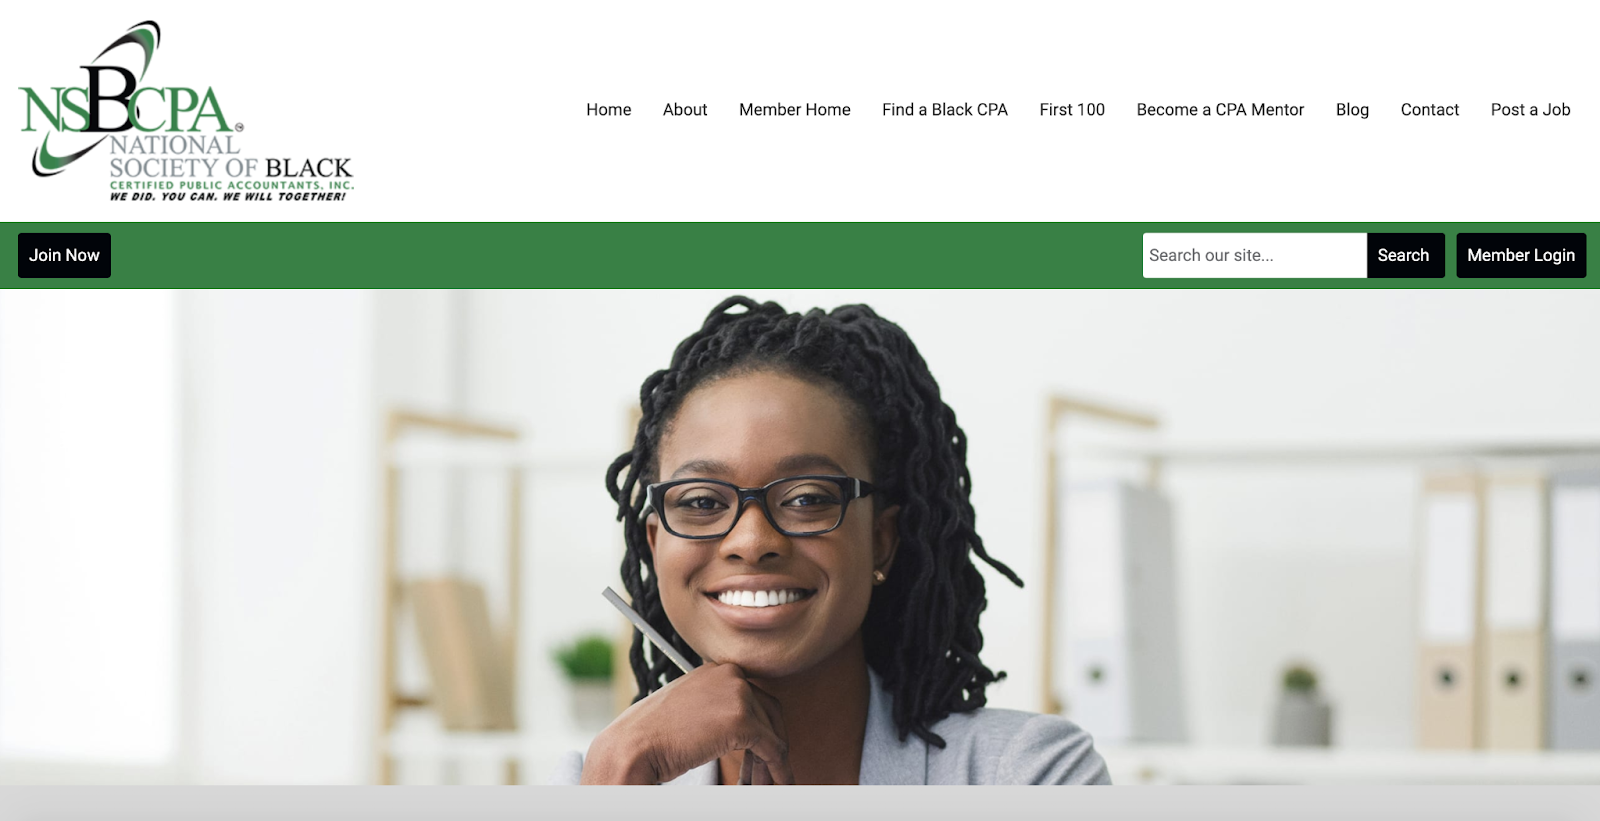 National Society of Black CPAs homepage that clearly displays navigation options as described in the post, contrasting buttons in black against a green navigation bar.